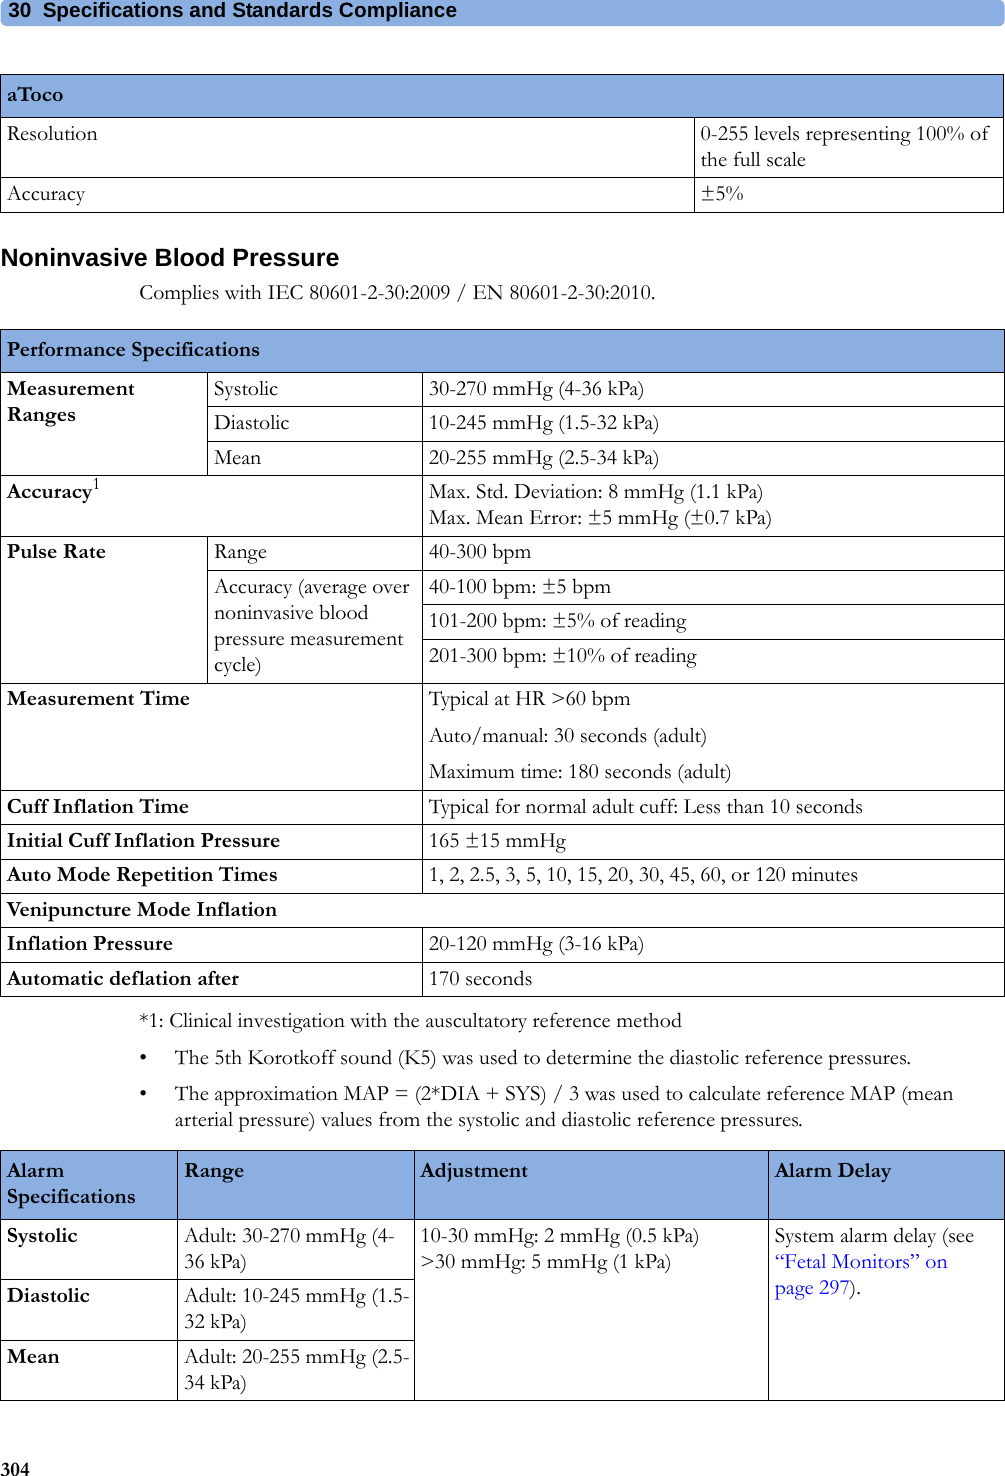 30  Specifications and Standards Compliance304Noninvasive Blood PressureComplies with IEC 80601-2-30:2009 / EN 80601-2-30:2010.*1: Clinical investigation with the auscultatory reference method• The 5th Korotkoff sound (K5) was used to determine the diastolic reference pressures.• The approximation MAP = (2*DIA + SYS) / 3 was used to calculate reference MAP (mean arterial pressure) values from the systolic and diastolic reference pressures.Resolution 0-255 levels representing 100% of the full scaleAccuracy ±5%aTocoPerformance Specifications Measurement RangesSystolic 30-270 mmHg (4-36 kPa)Diastolic 10-245 mmHg (1.5-32 kPa)Mean 20-255 mmHg (2.5-34 kPa)Accuracy1Max. Std. Deviation: 8 mmHg (1.1 kPa) Max. Mean Error: ±5 mmHg (±0.7 kPa)Pulse Rate Range 40-300 bpmAccuracy (average over noninvasive blood pressure measurement cycle)40-100 bpm: ±5 bpm101-200 bpm: ±5% of reading201-300 bpm: ±10% of readingMeasurement Time Typical at HR &gt;60 bpmAuto/manual: 30 seconds (adult)Maximum time: 180 seconds (adult)Cuff Inflation Time Typical for normal adult cuff: Less than 10 secondsInitial Cuff Inflation Pressure 165 ±15 mmHgAuto Mode Repetition Times 1, 2, 2.5, 3, 5, 10, 15, 20, 30, 45, 60, or 120 minutesVenipuncture Mode InflationInflation Pressure 20-120 mmHg (3-16 kPa)Automatic deflation after 170 secondsAlarm Specifications Range Adjustment Alarm DelaySystolic Adult: 30-270 mmHg (4-36 kPa)10-30 mmHg: 2 mmHg (0.5 kPa)  &gt;30 mmHg: 5 mmHg (1 kPa)System alarm delay (see “Fetal Monitors” on page 297).Diastolic Adult: 10-245 mmHg (1.5-32 kPa)Mean Adult: 20-255 mmHg (2.5-34 kPa)